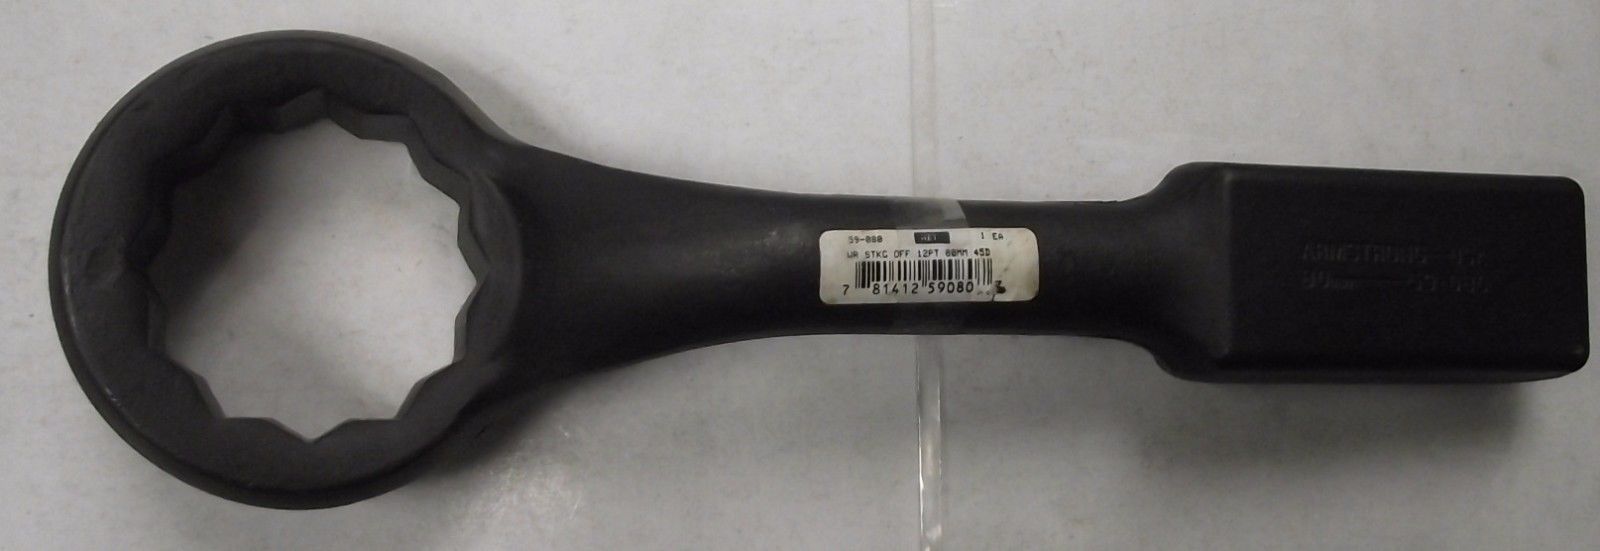 Armstrong 59-080 80mm Black Oxide 12 Point 45 Degree Offset Striking Wrench USA